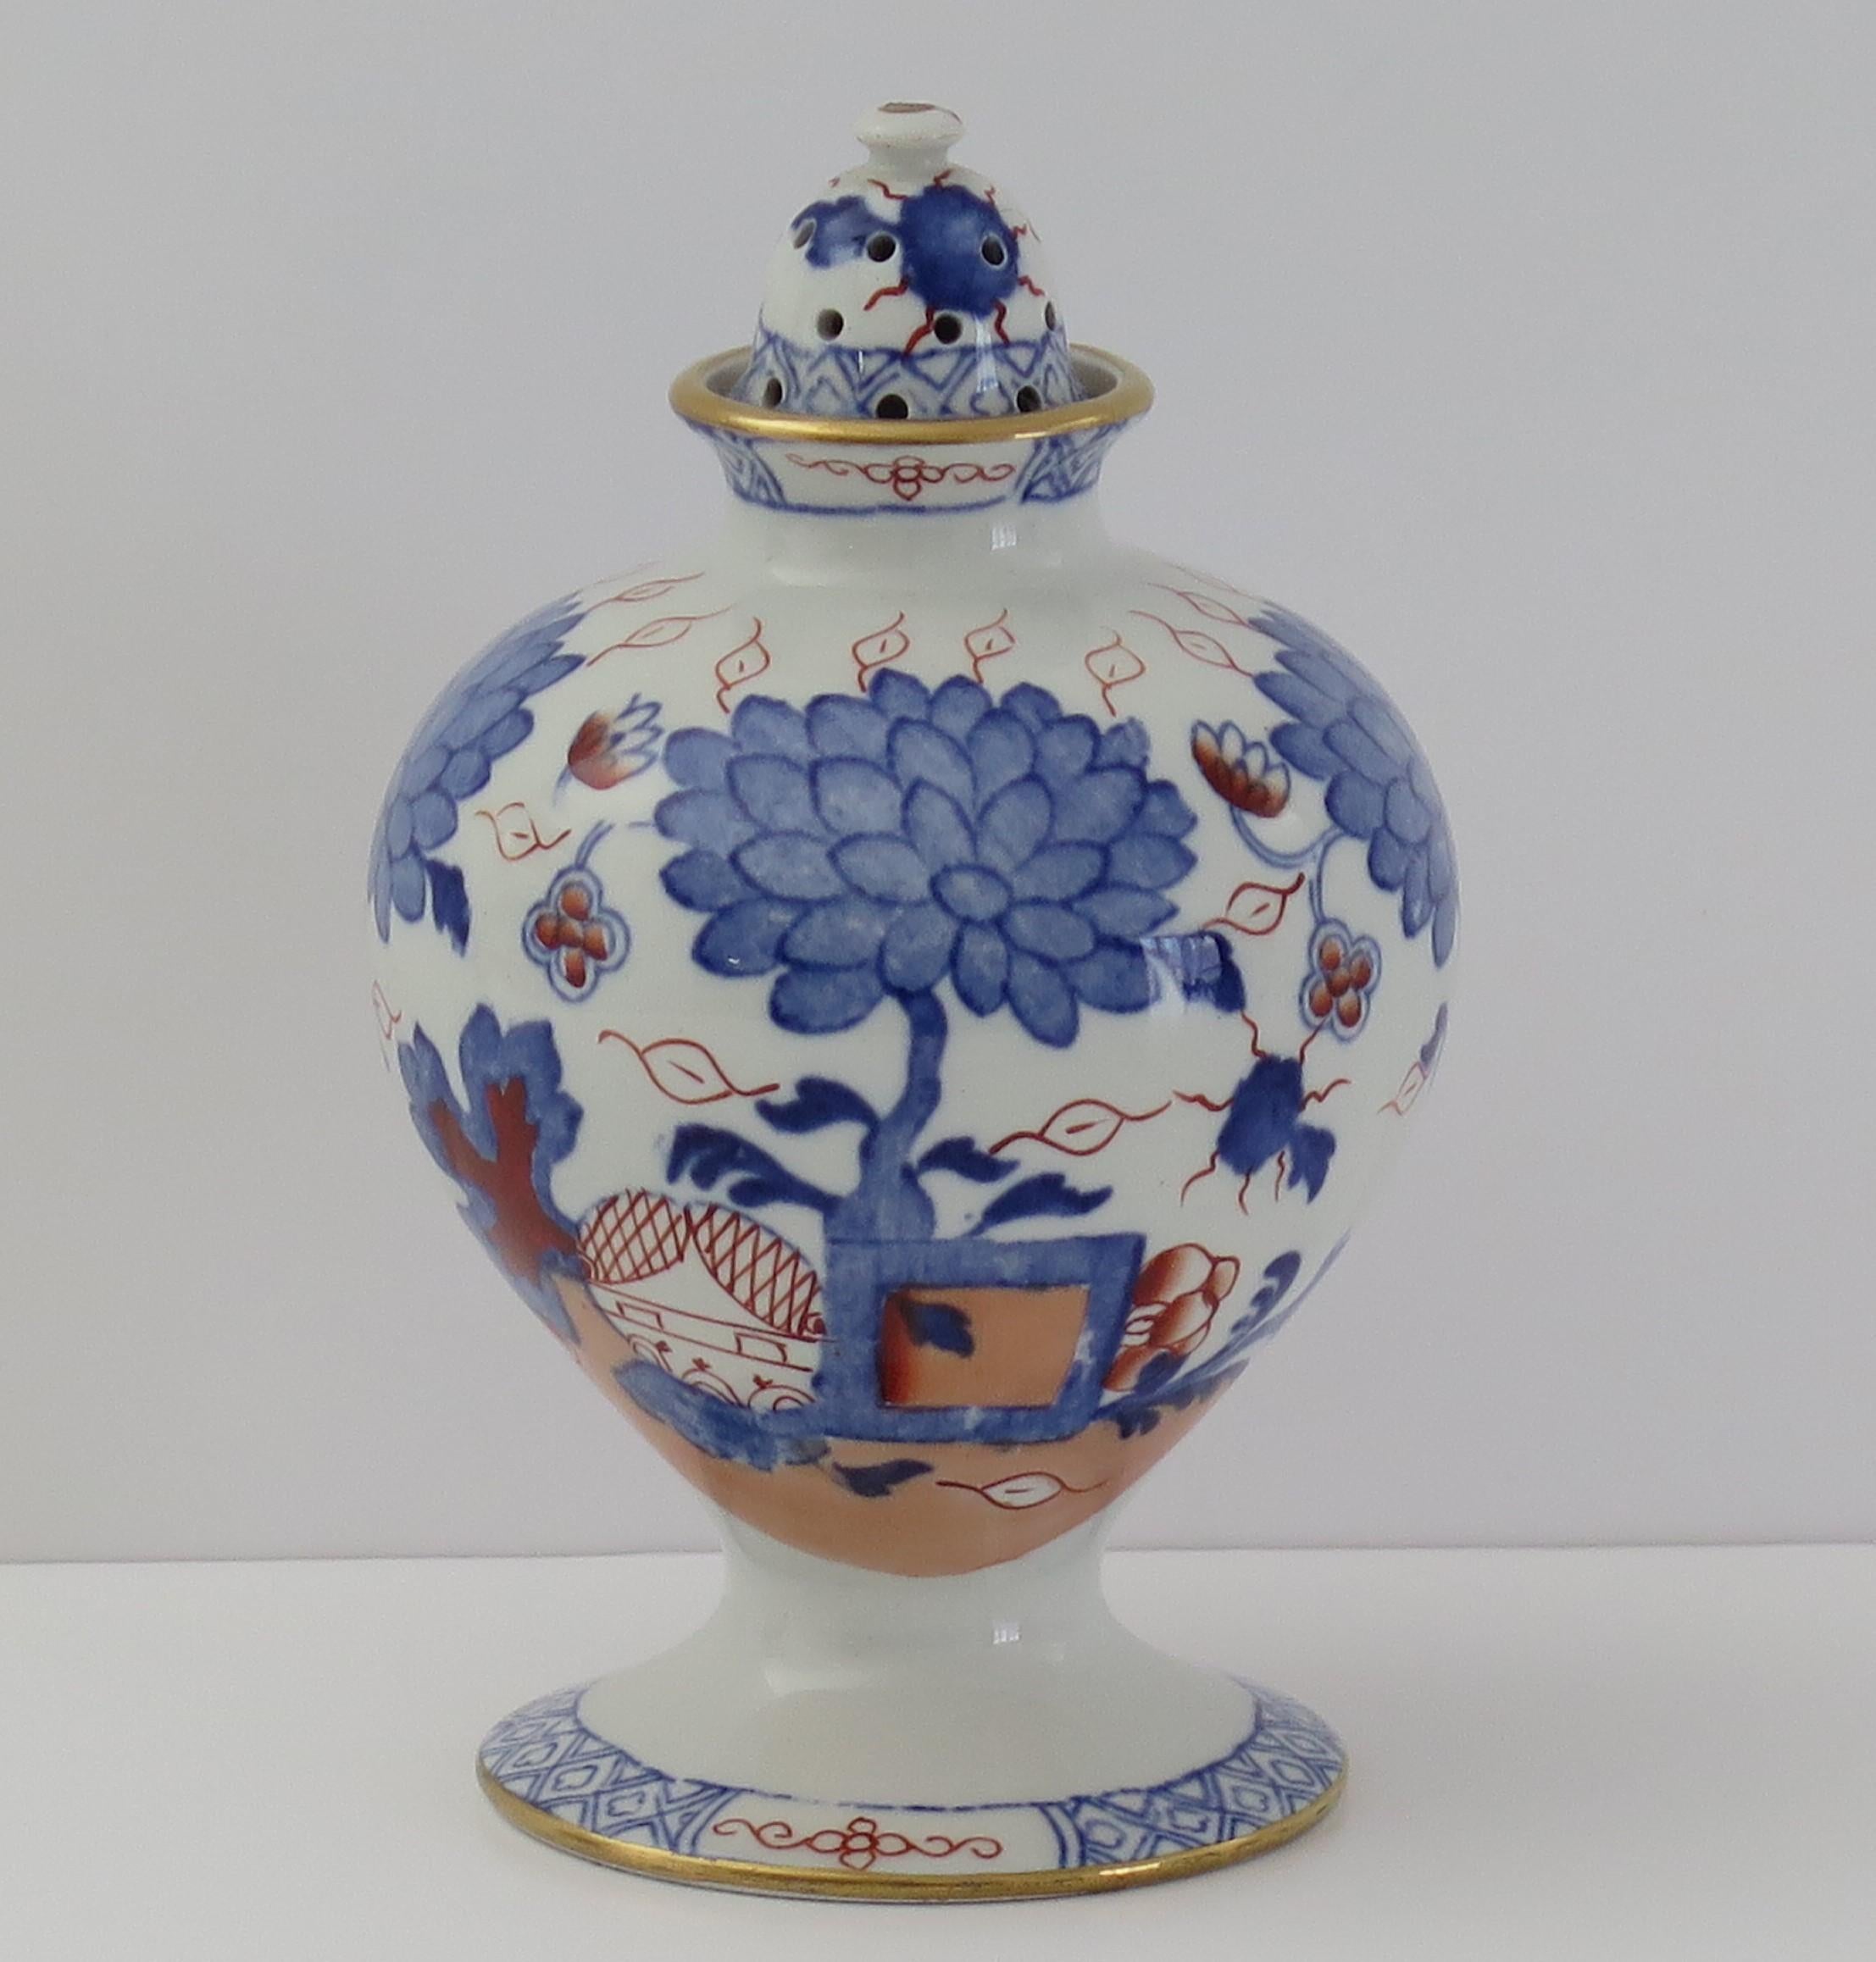 This is a rare Pot-Pourri Vase and Cover, hand painted in the Jardiniere pattern, made by Mason's Ironstone, Lane Delph, England and dating to circa 1890.

This is a rare piece potted as a globular vase with a narrow neck, raised on a low foot and